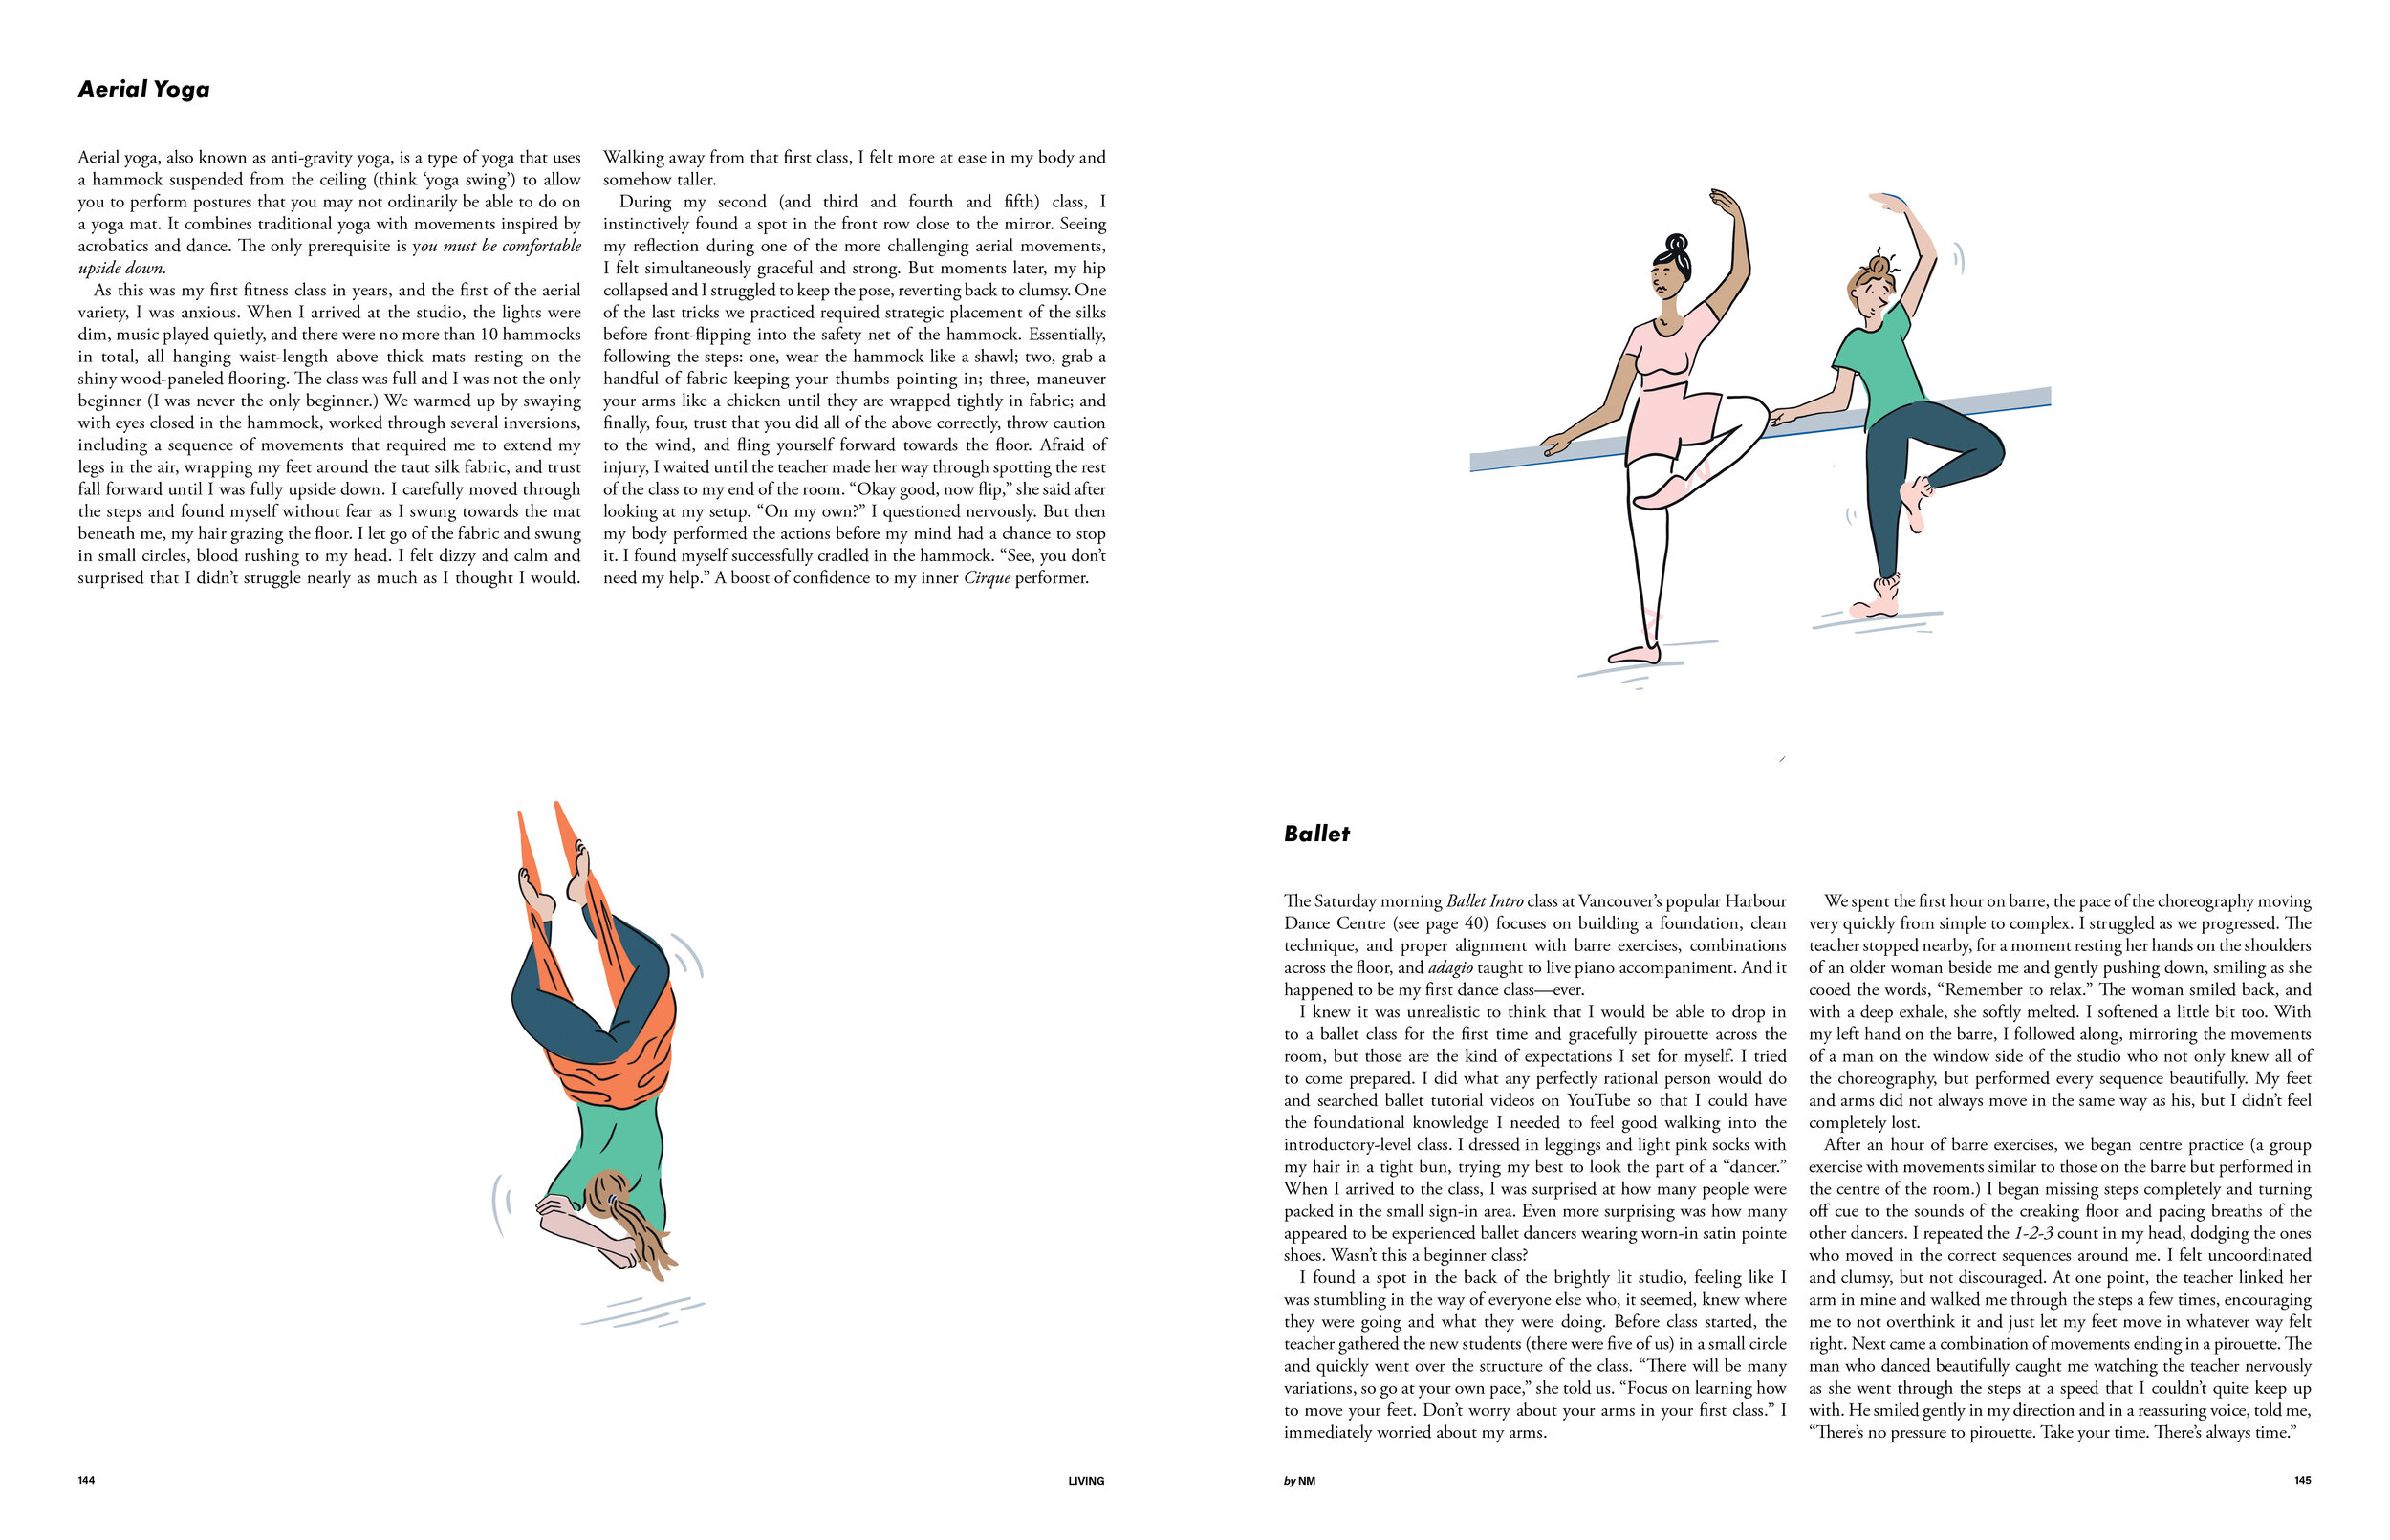 Movement by NM Issue 01_73_The Beginner2.jpg